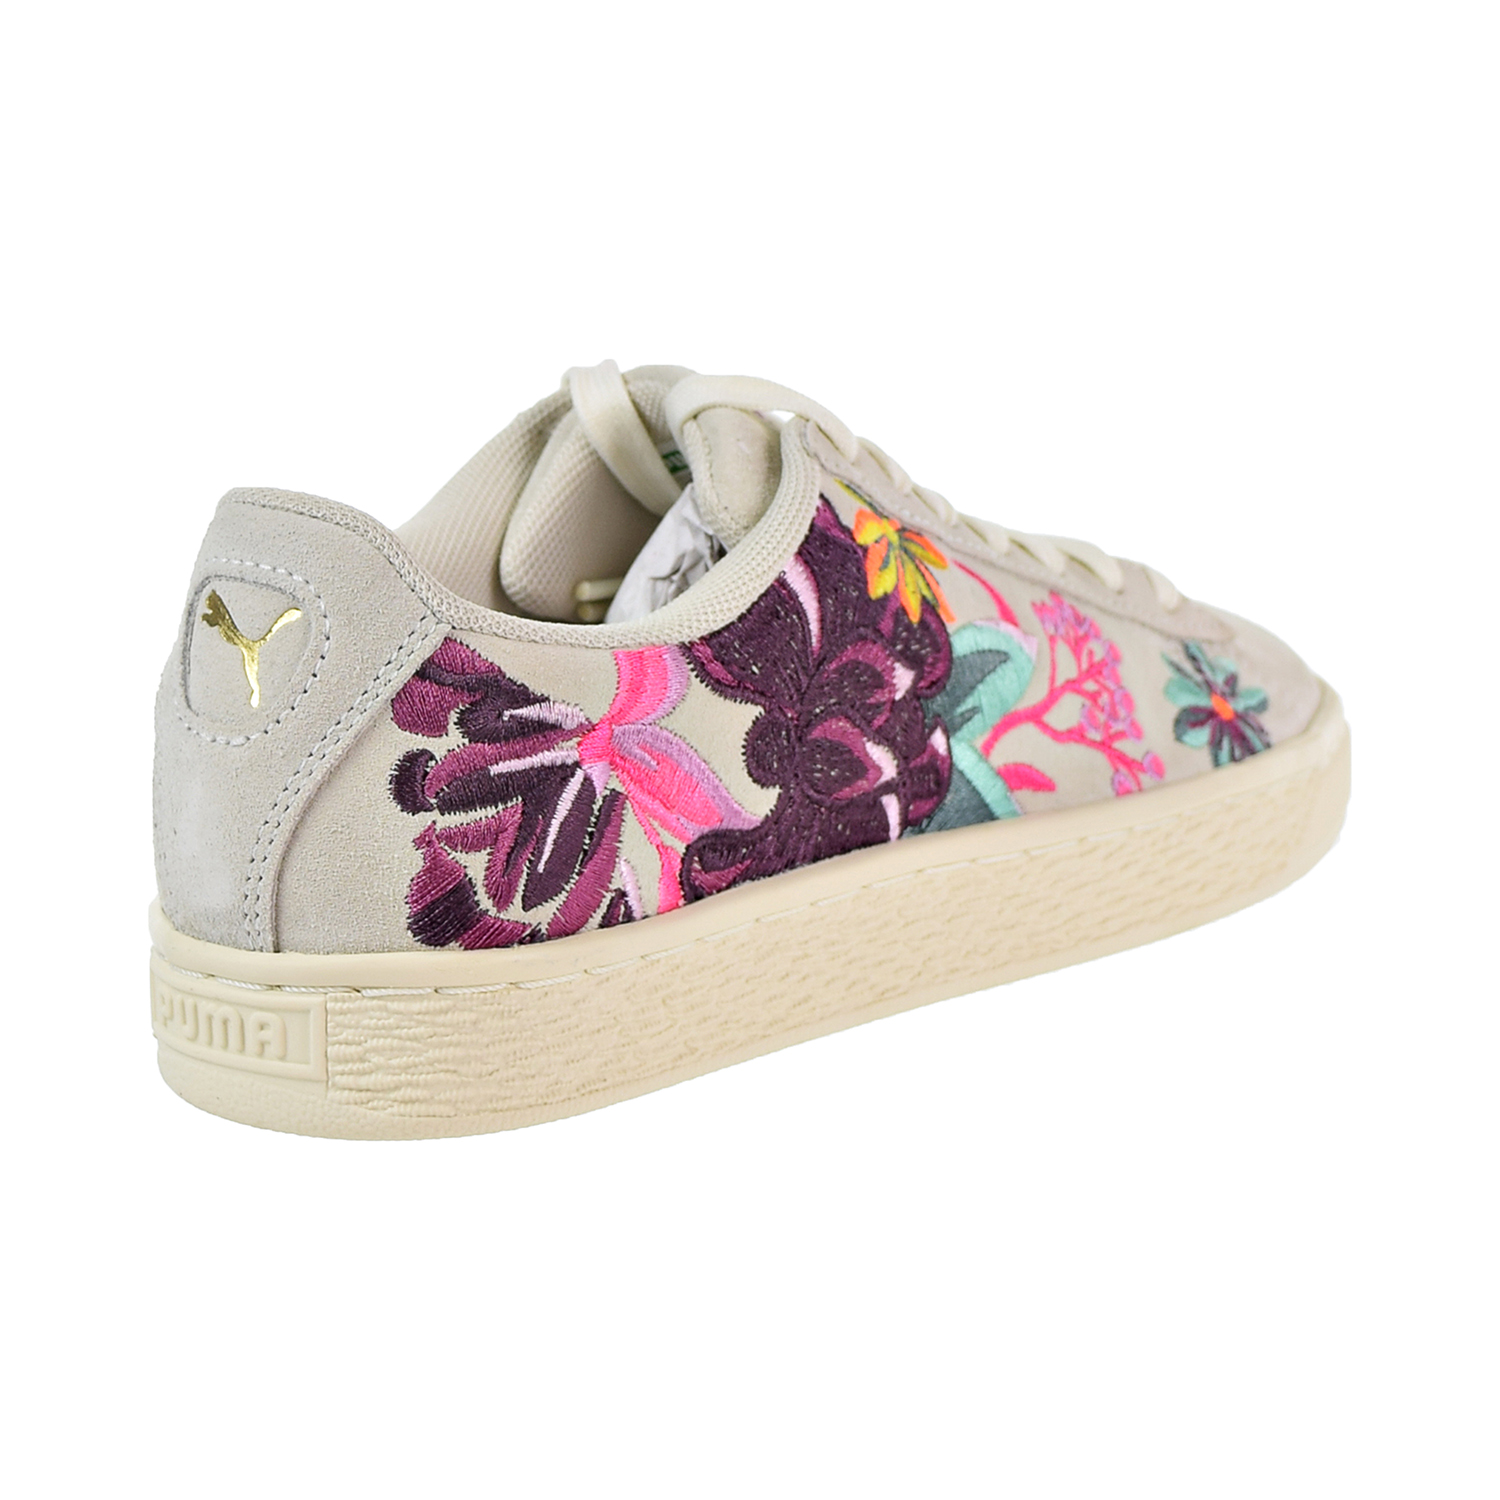 suede hyper embroidered women's sneakers